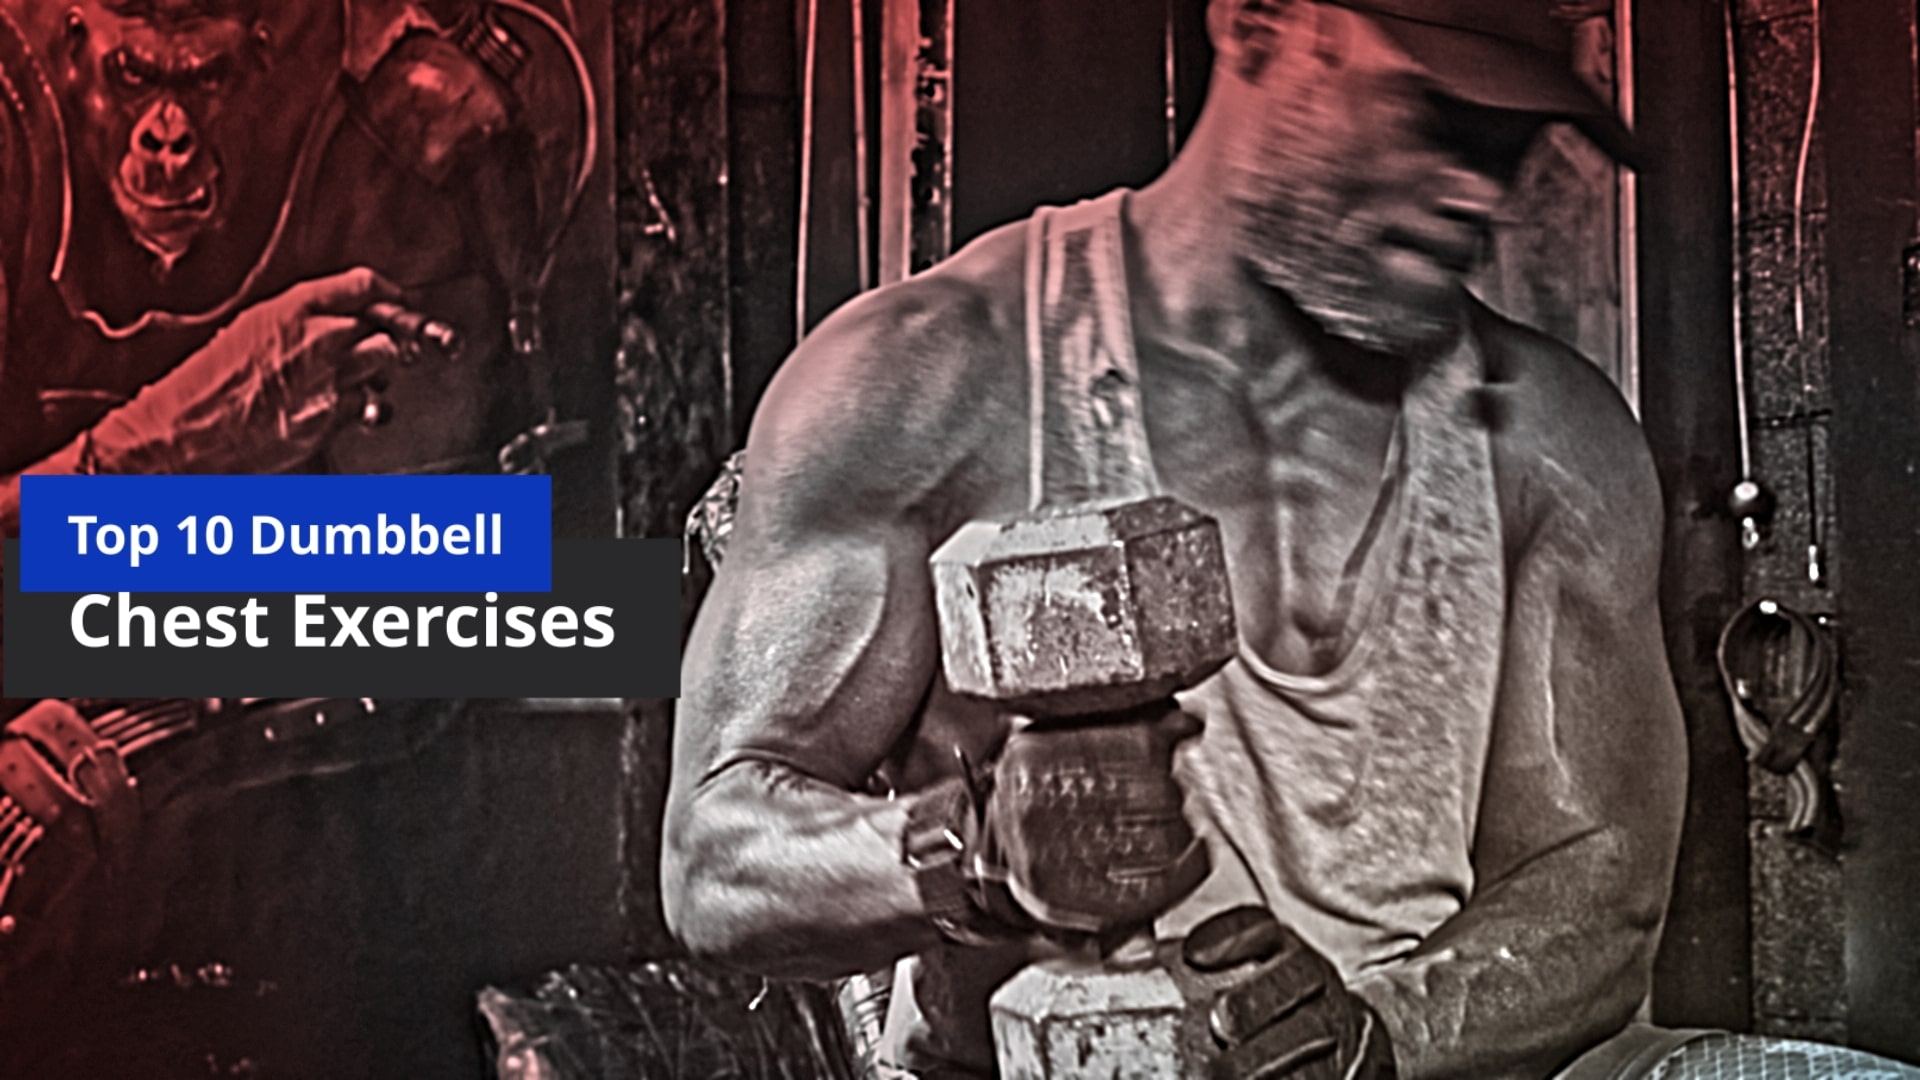 Top 10 Dumbbell Chest Exercises For Building Muscle in 2022 and Beyond